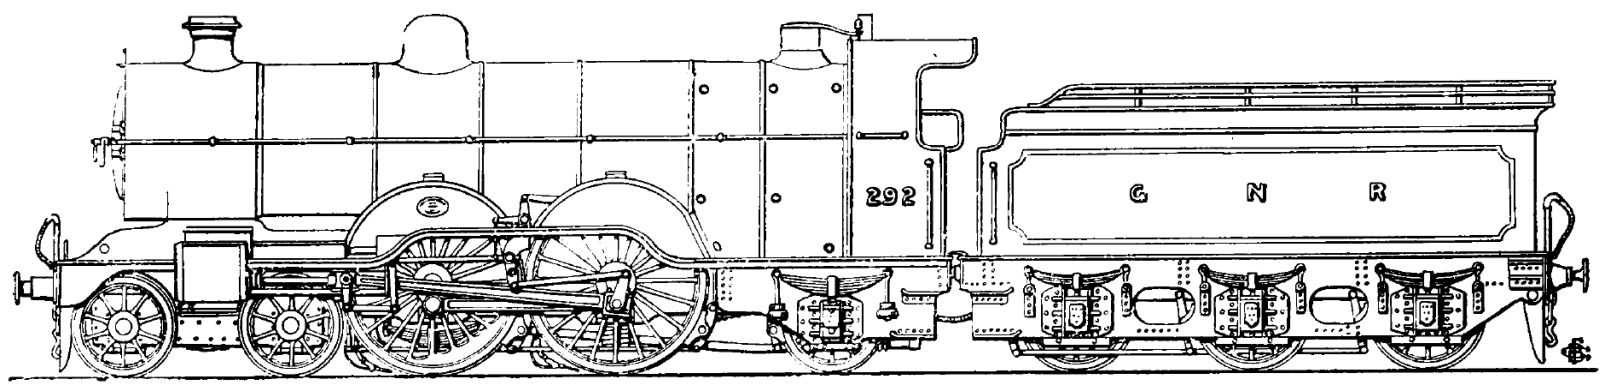 Schematical drawing of No. 292